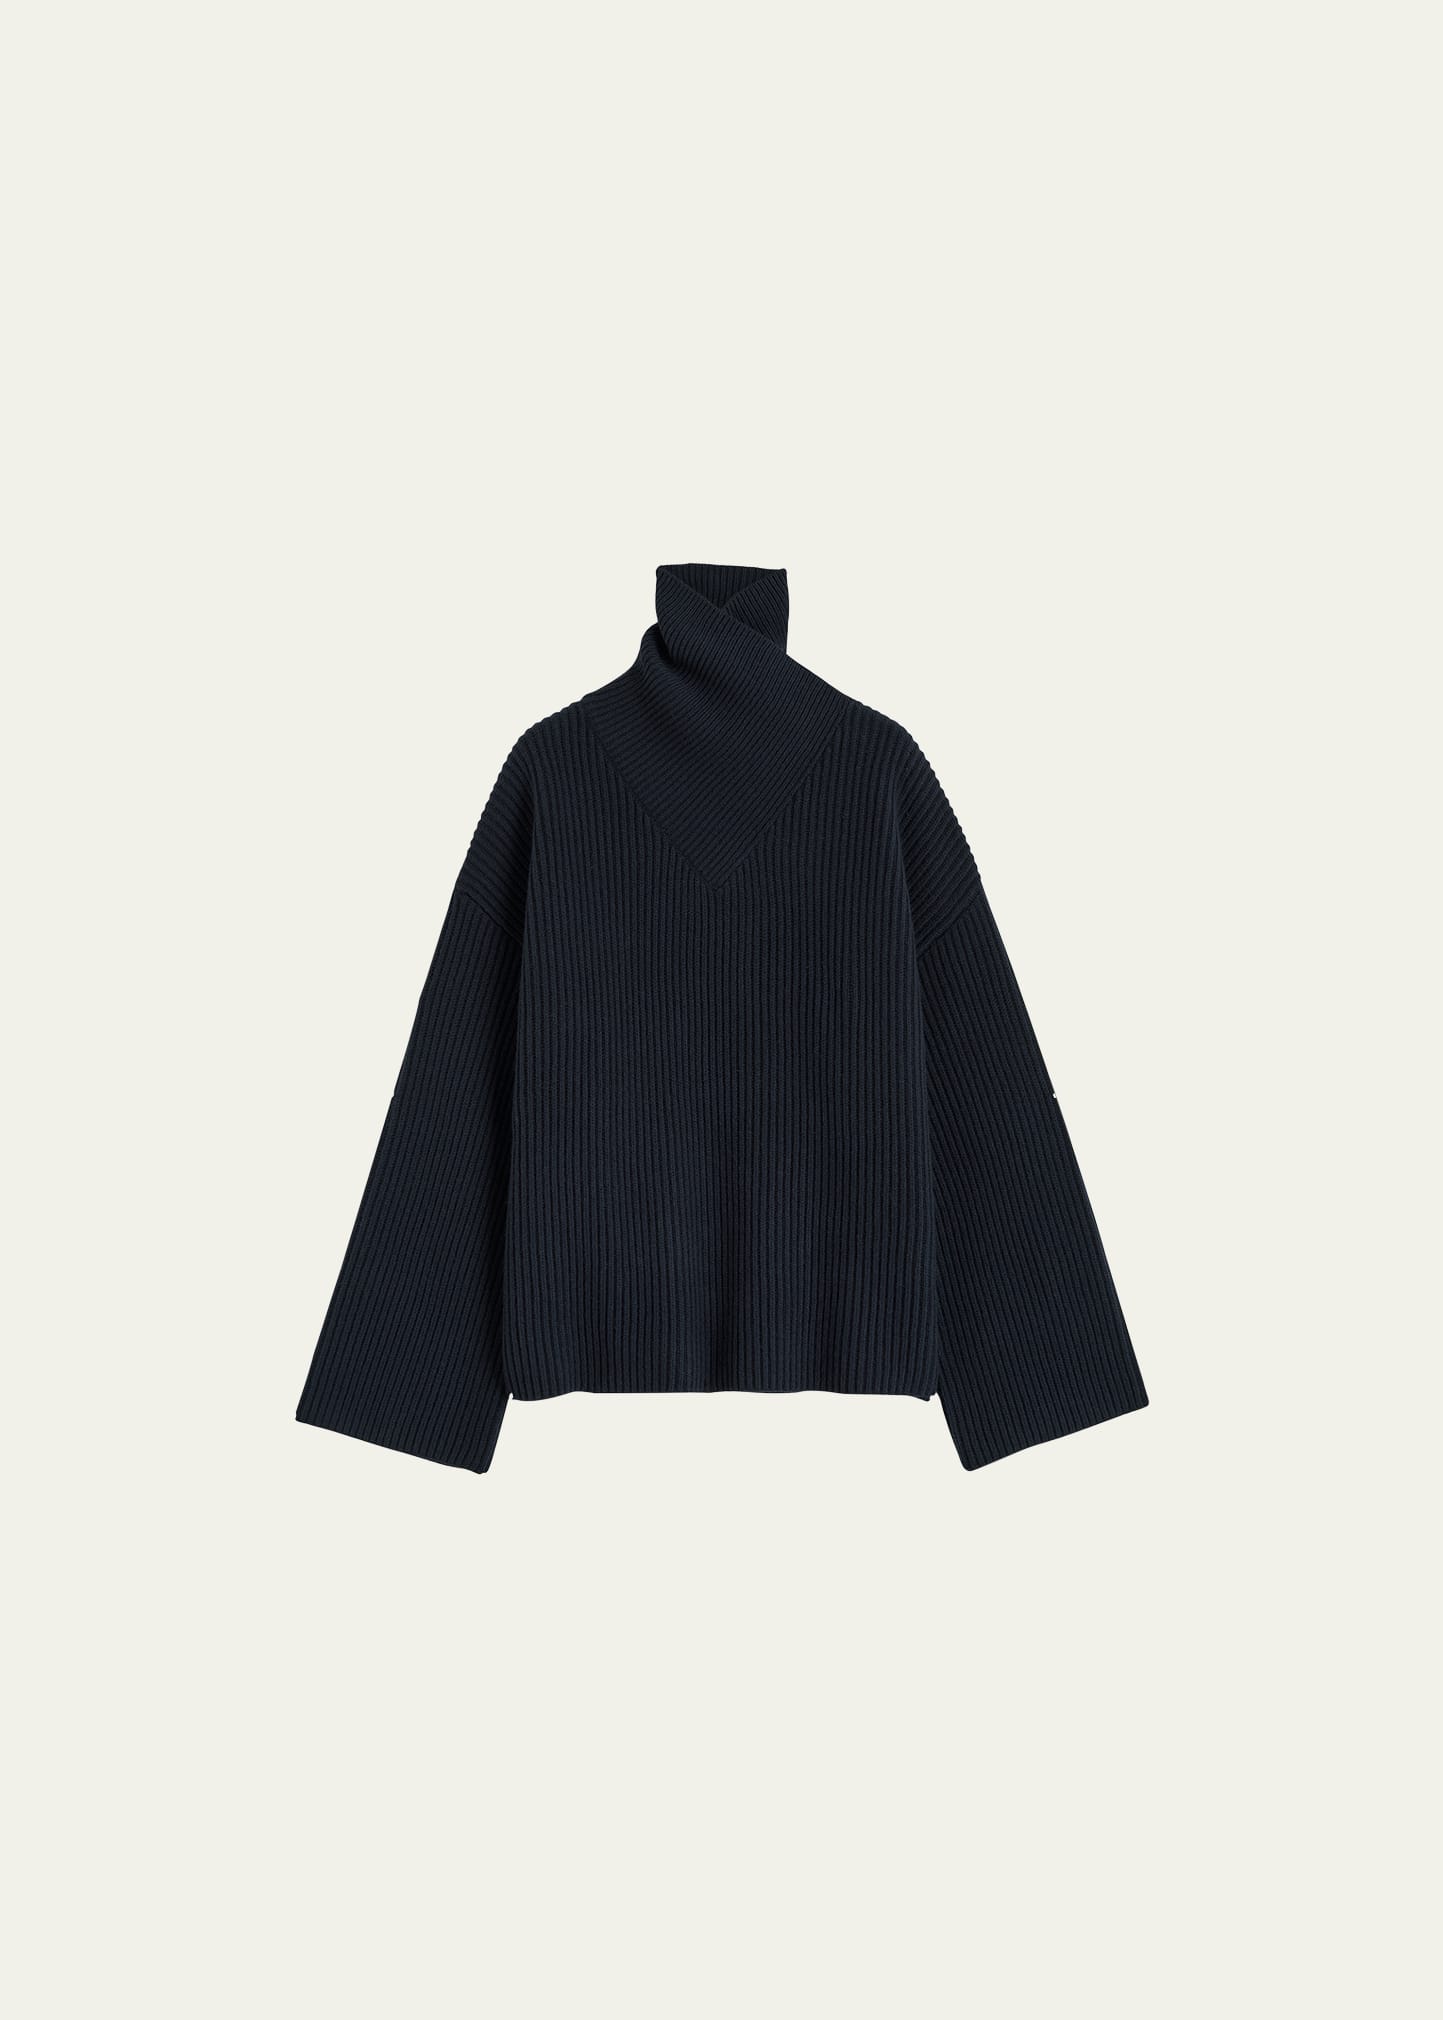 Toteme Wrapped Turtleneck Knit Sweater